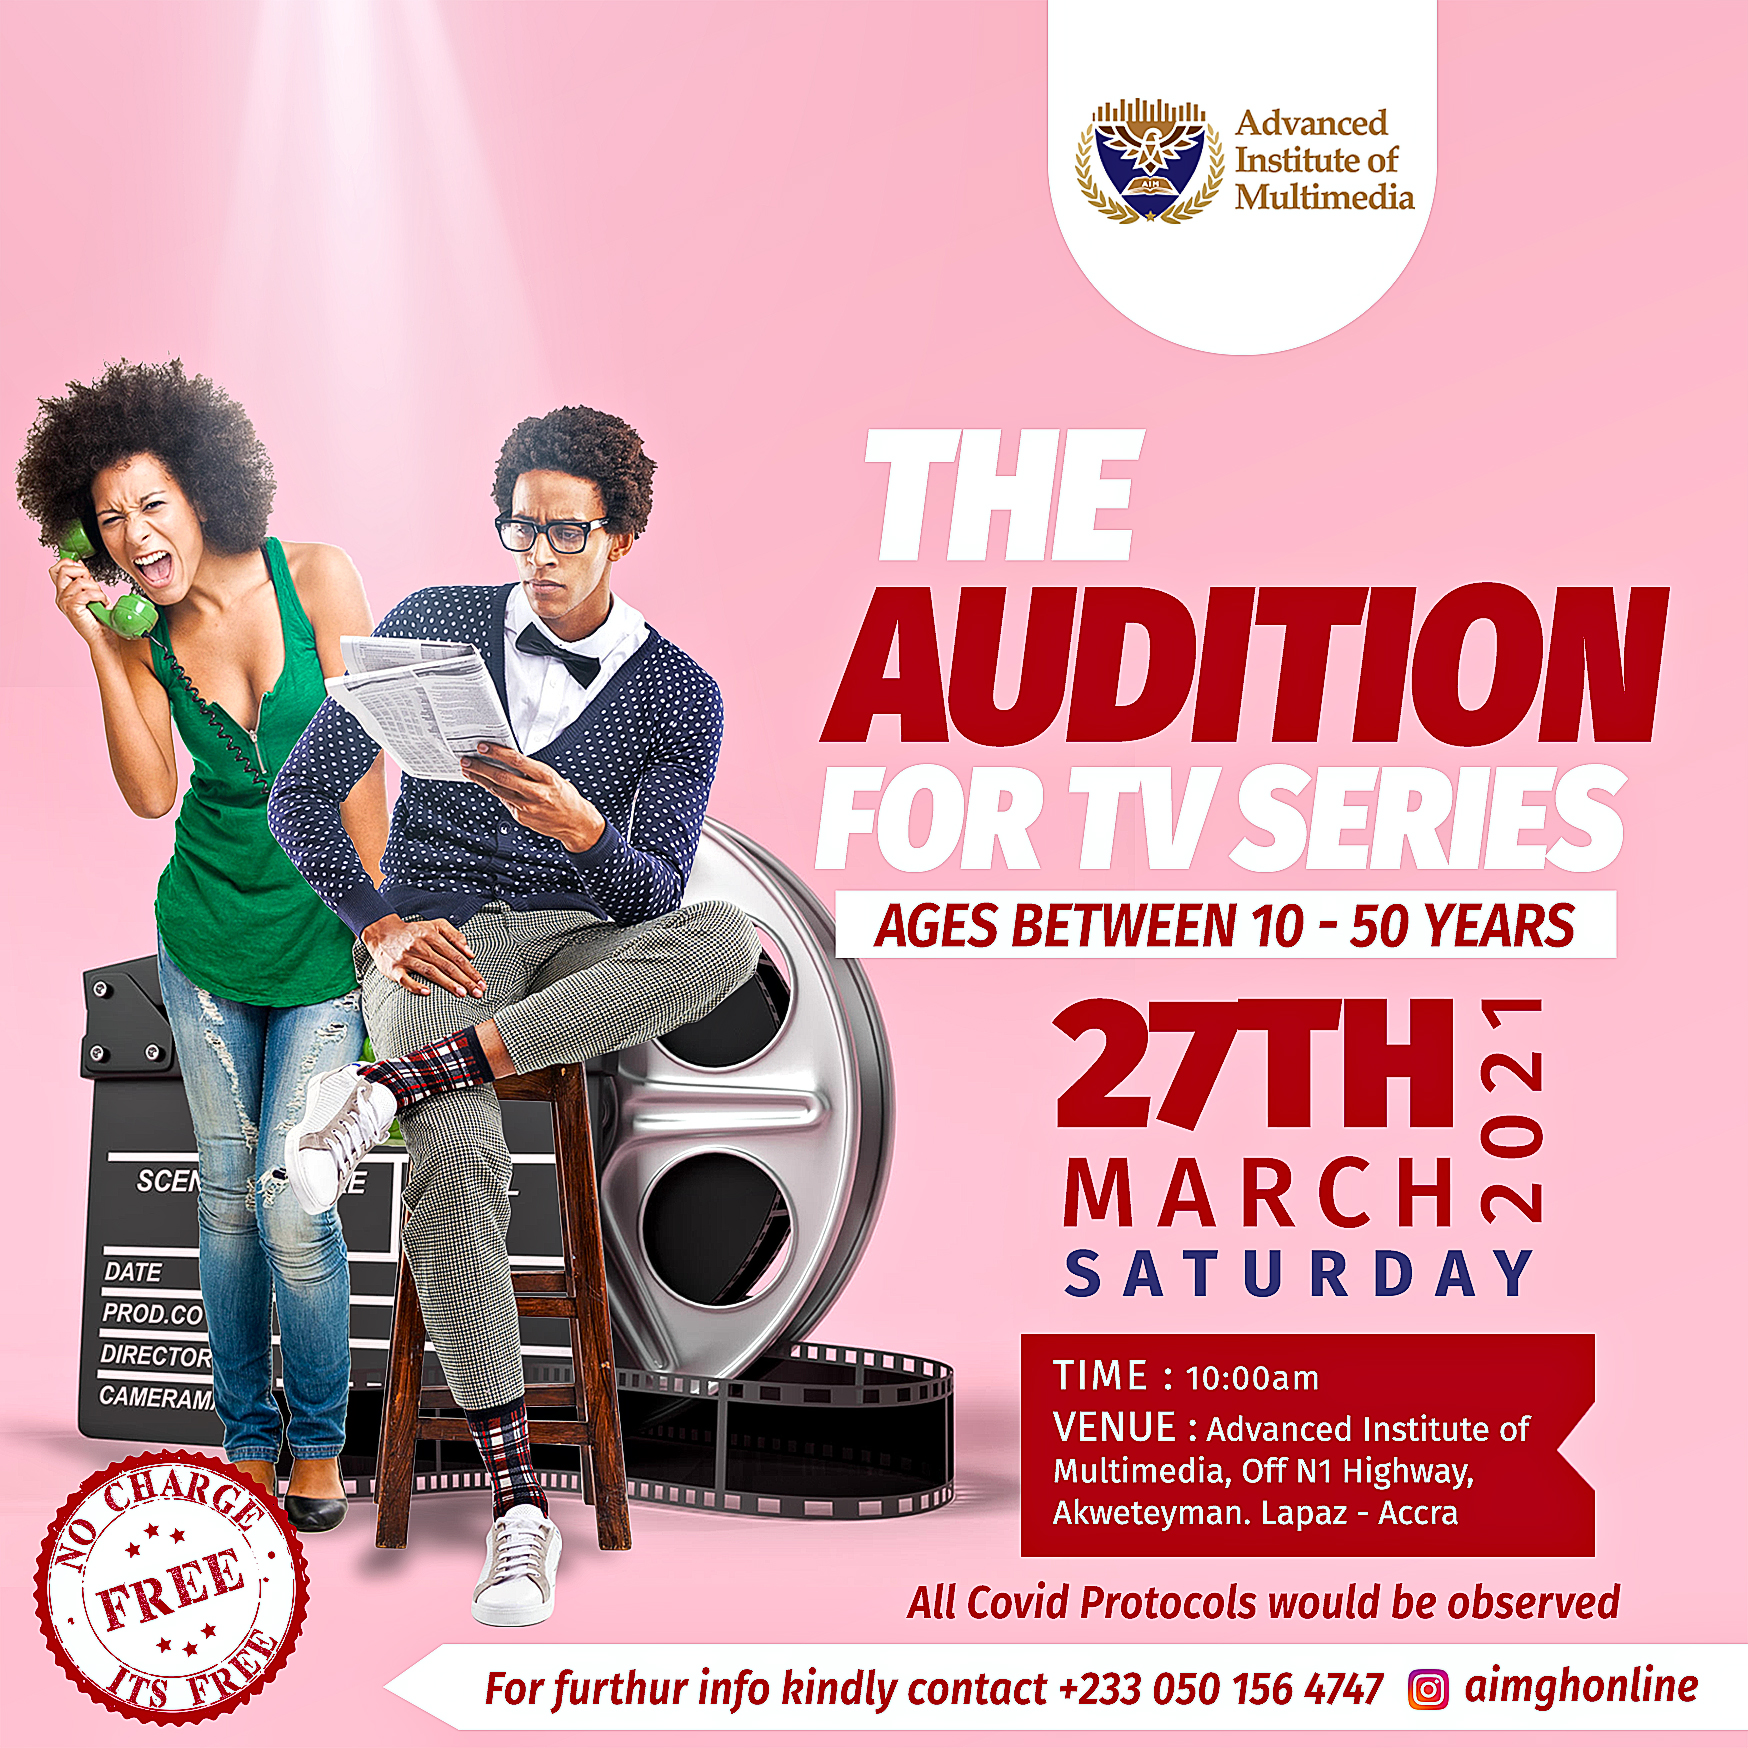 Search for new talent is here as AIM hosts TV Series Audition